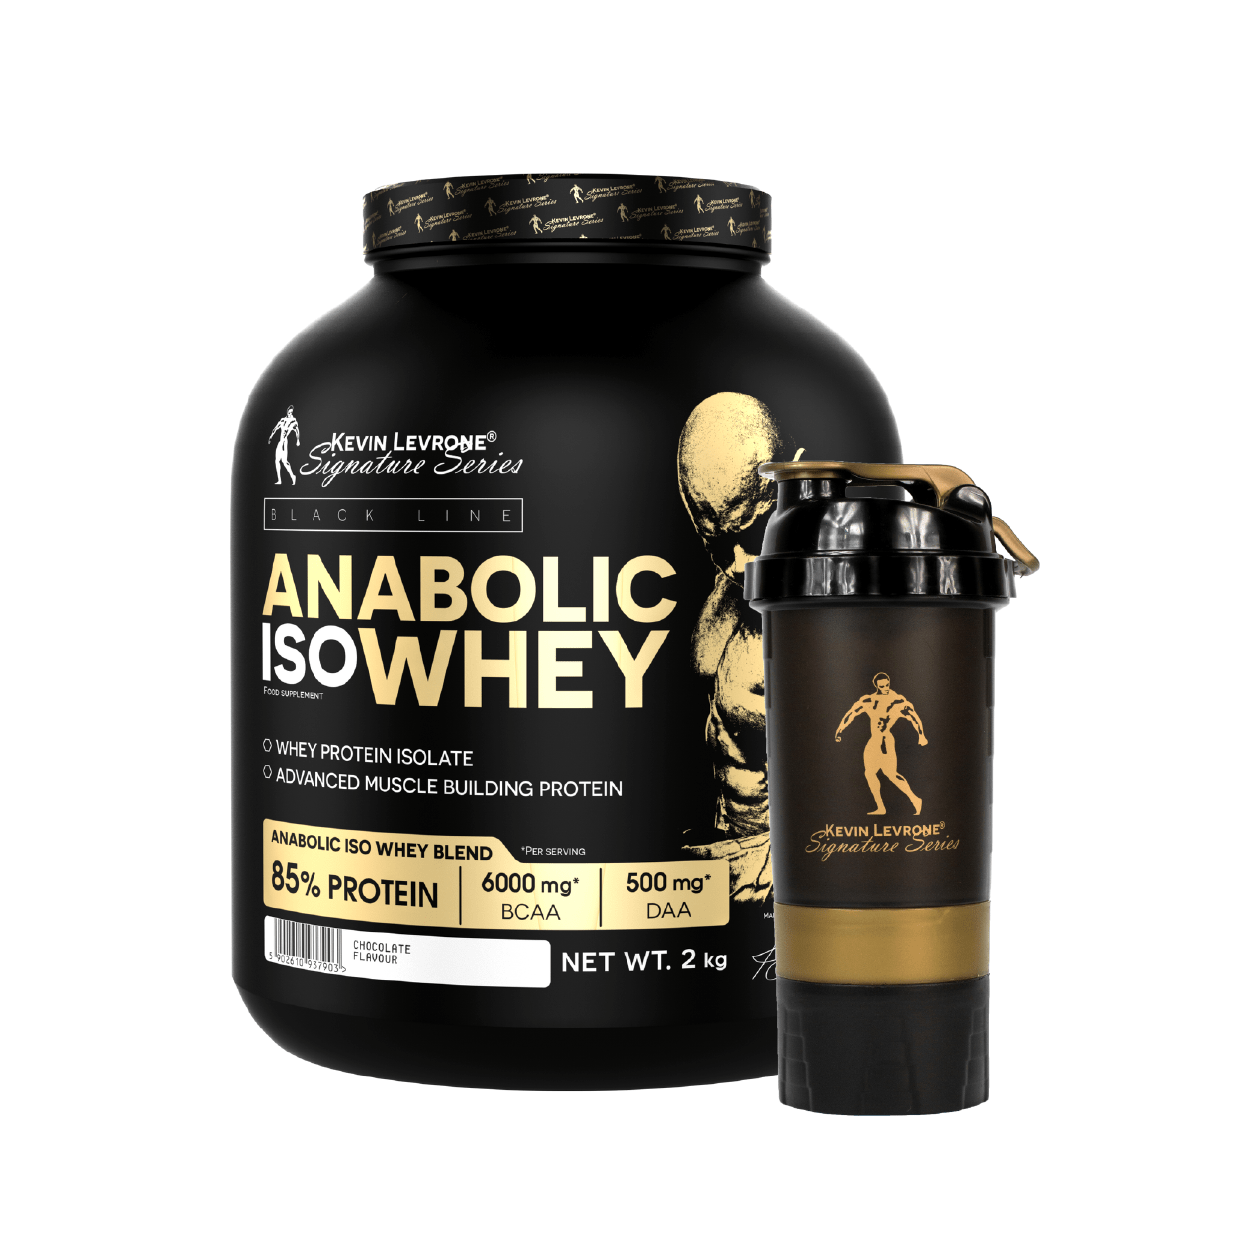 Kevin Levrone Anabolic Iso Whey Muscle Shop Perú 6038